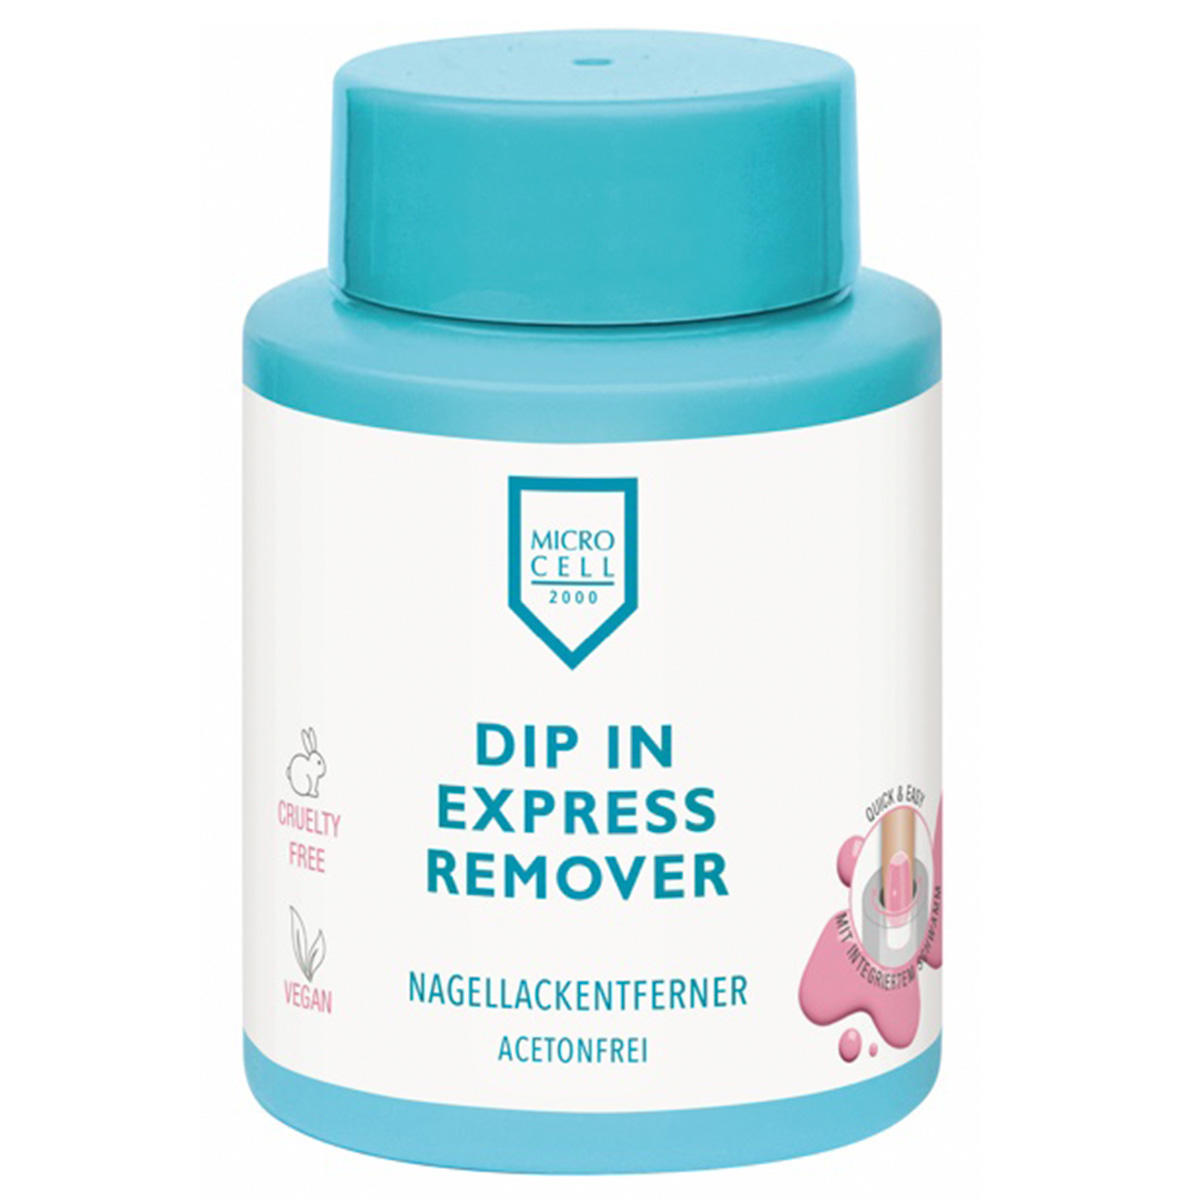 MICRO CELL DIP IN EXPRESS REMOVER 75 ml - 1